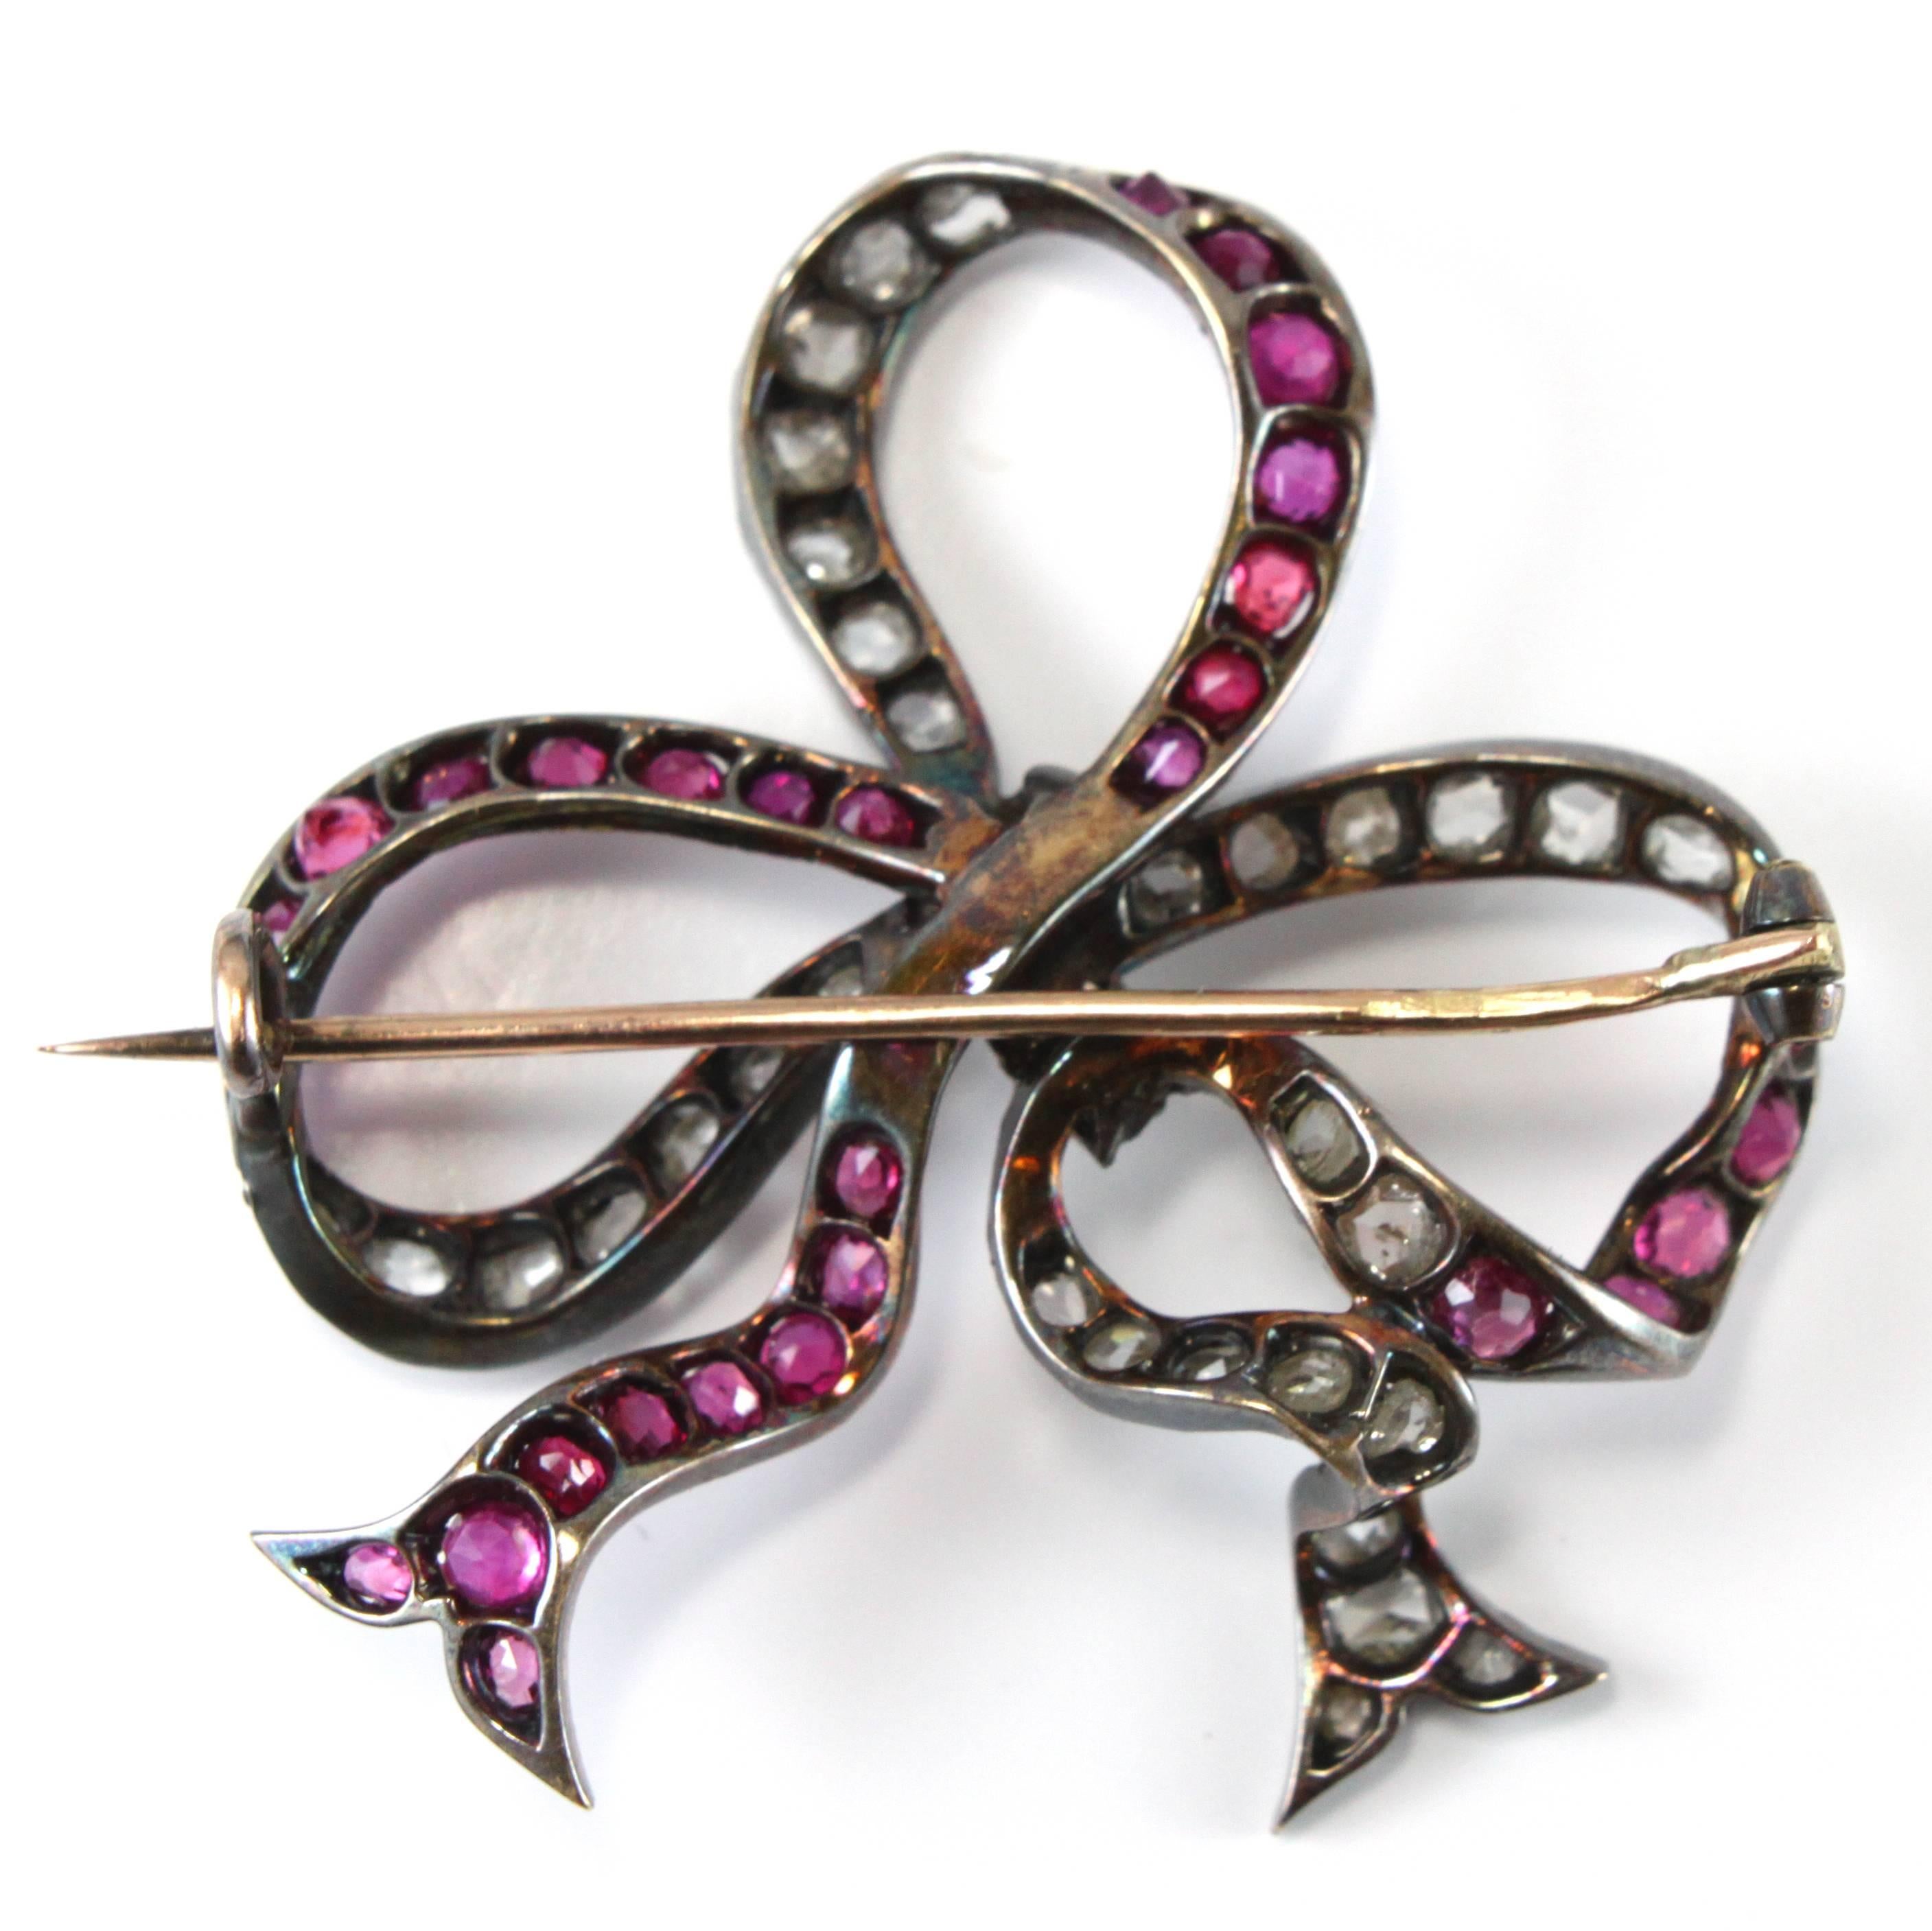 A beautiful Victorian ribbon bow brooch set alternating with rubies and diamonds in silver and gold.